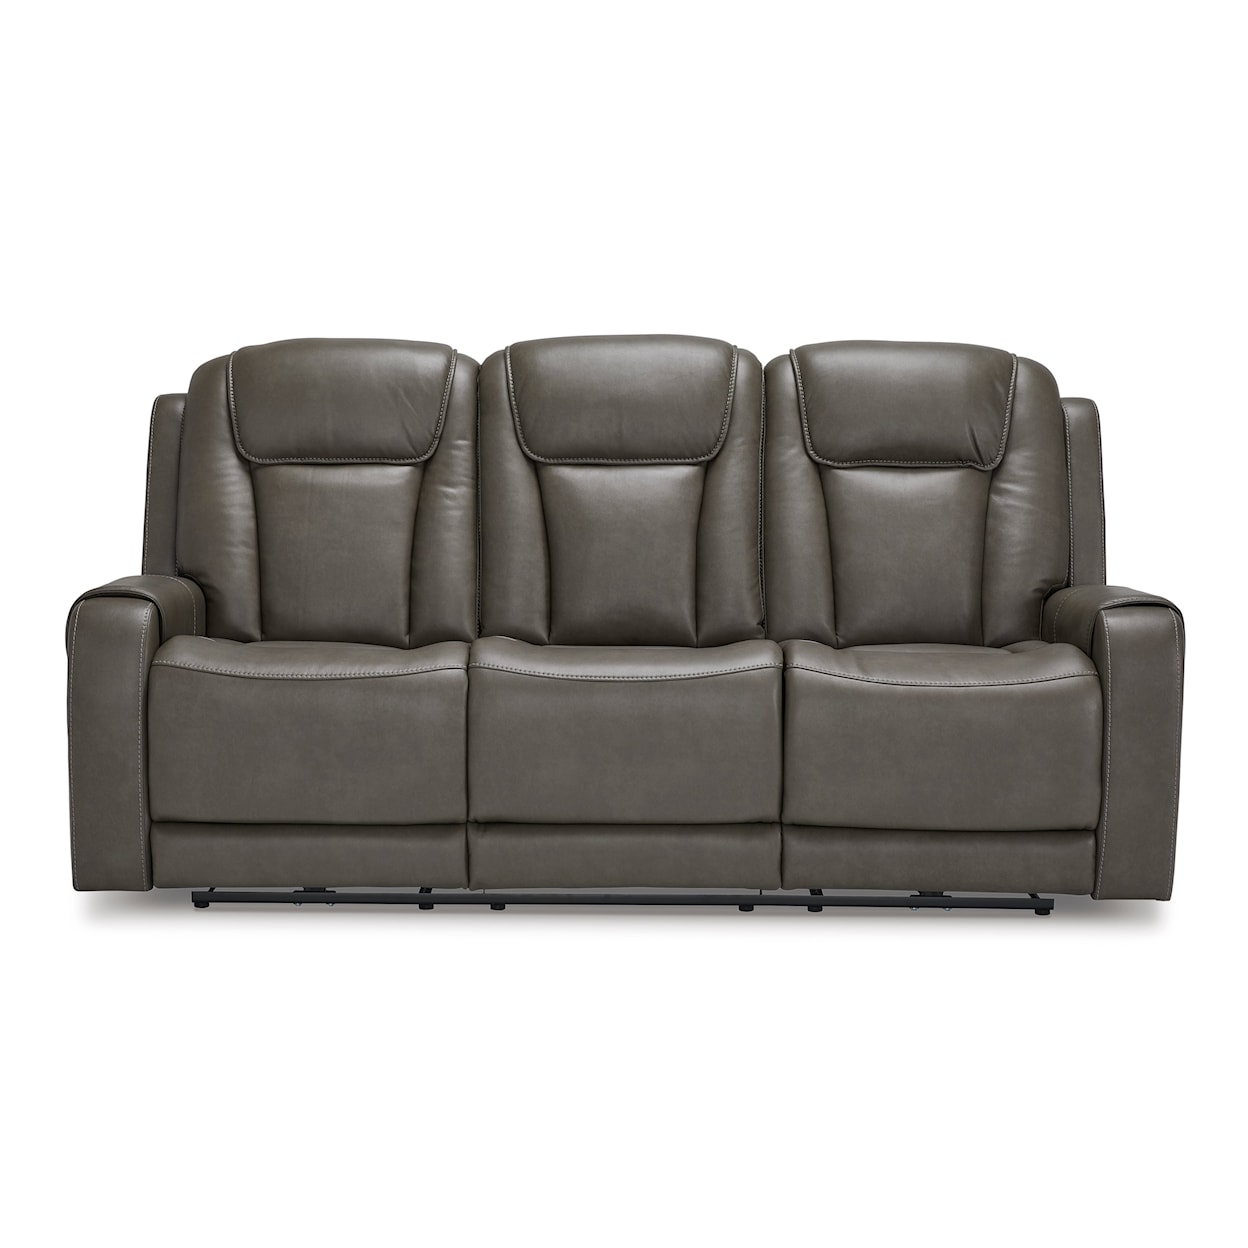 Signature Design by Ashley Furniture Card Player Reclining Sofa